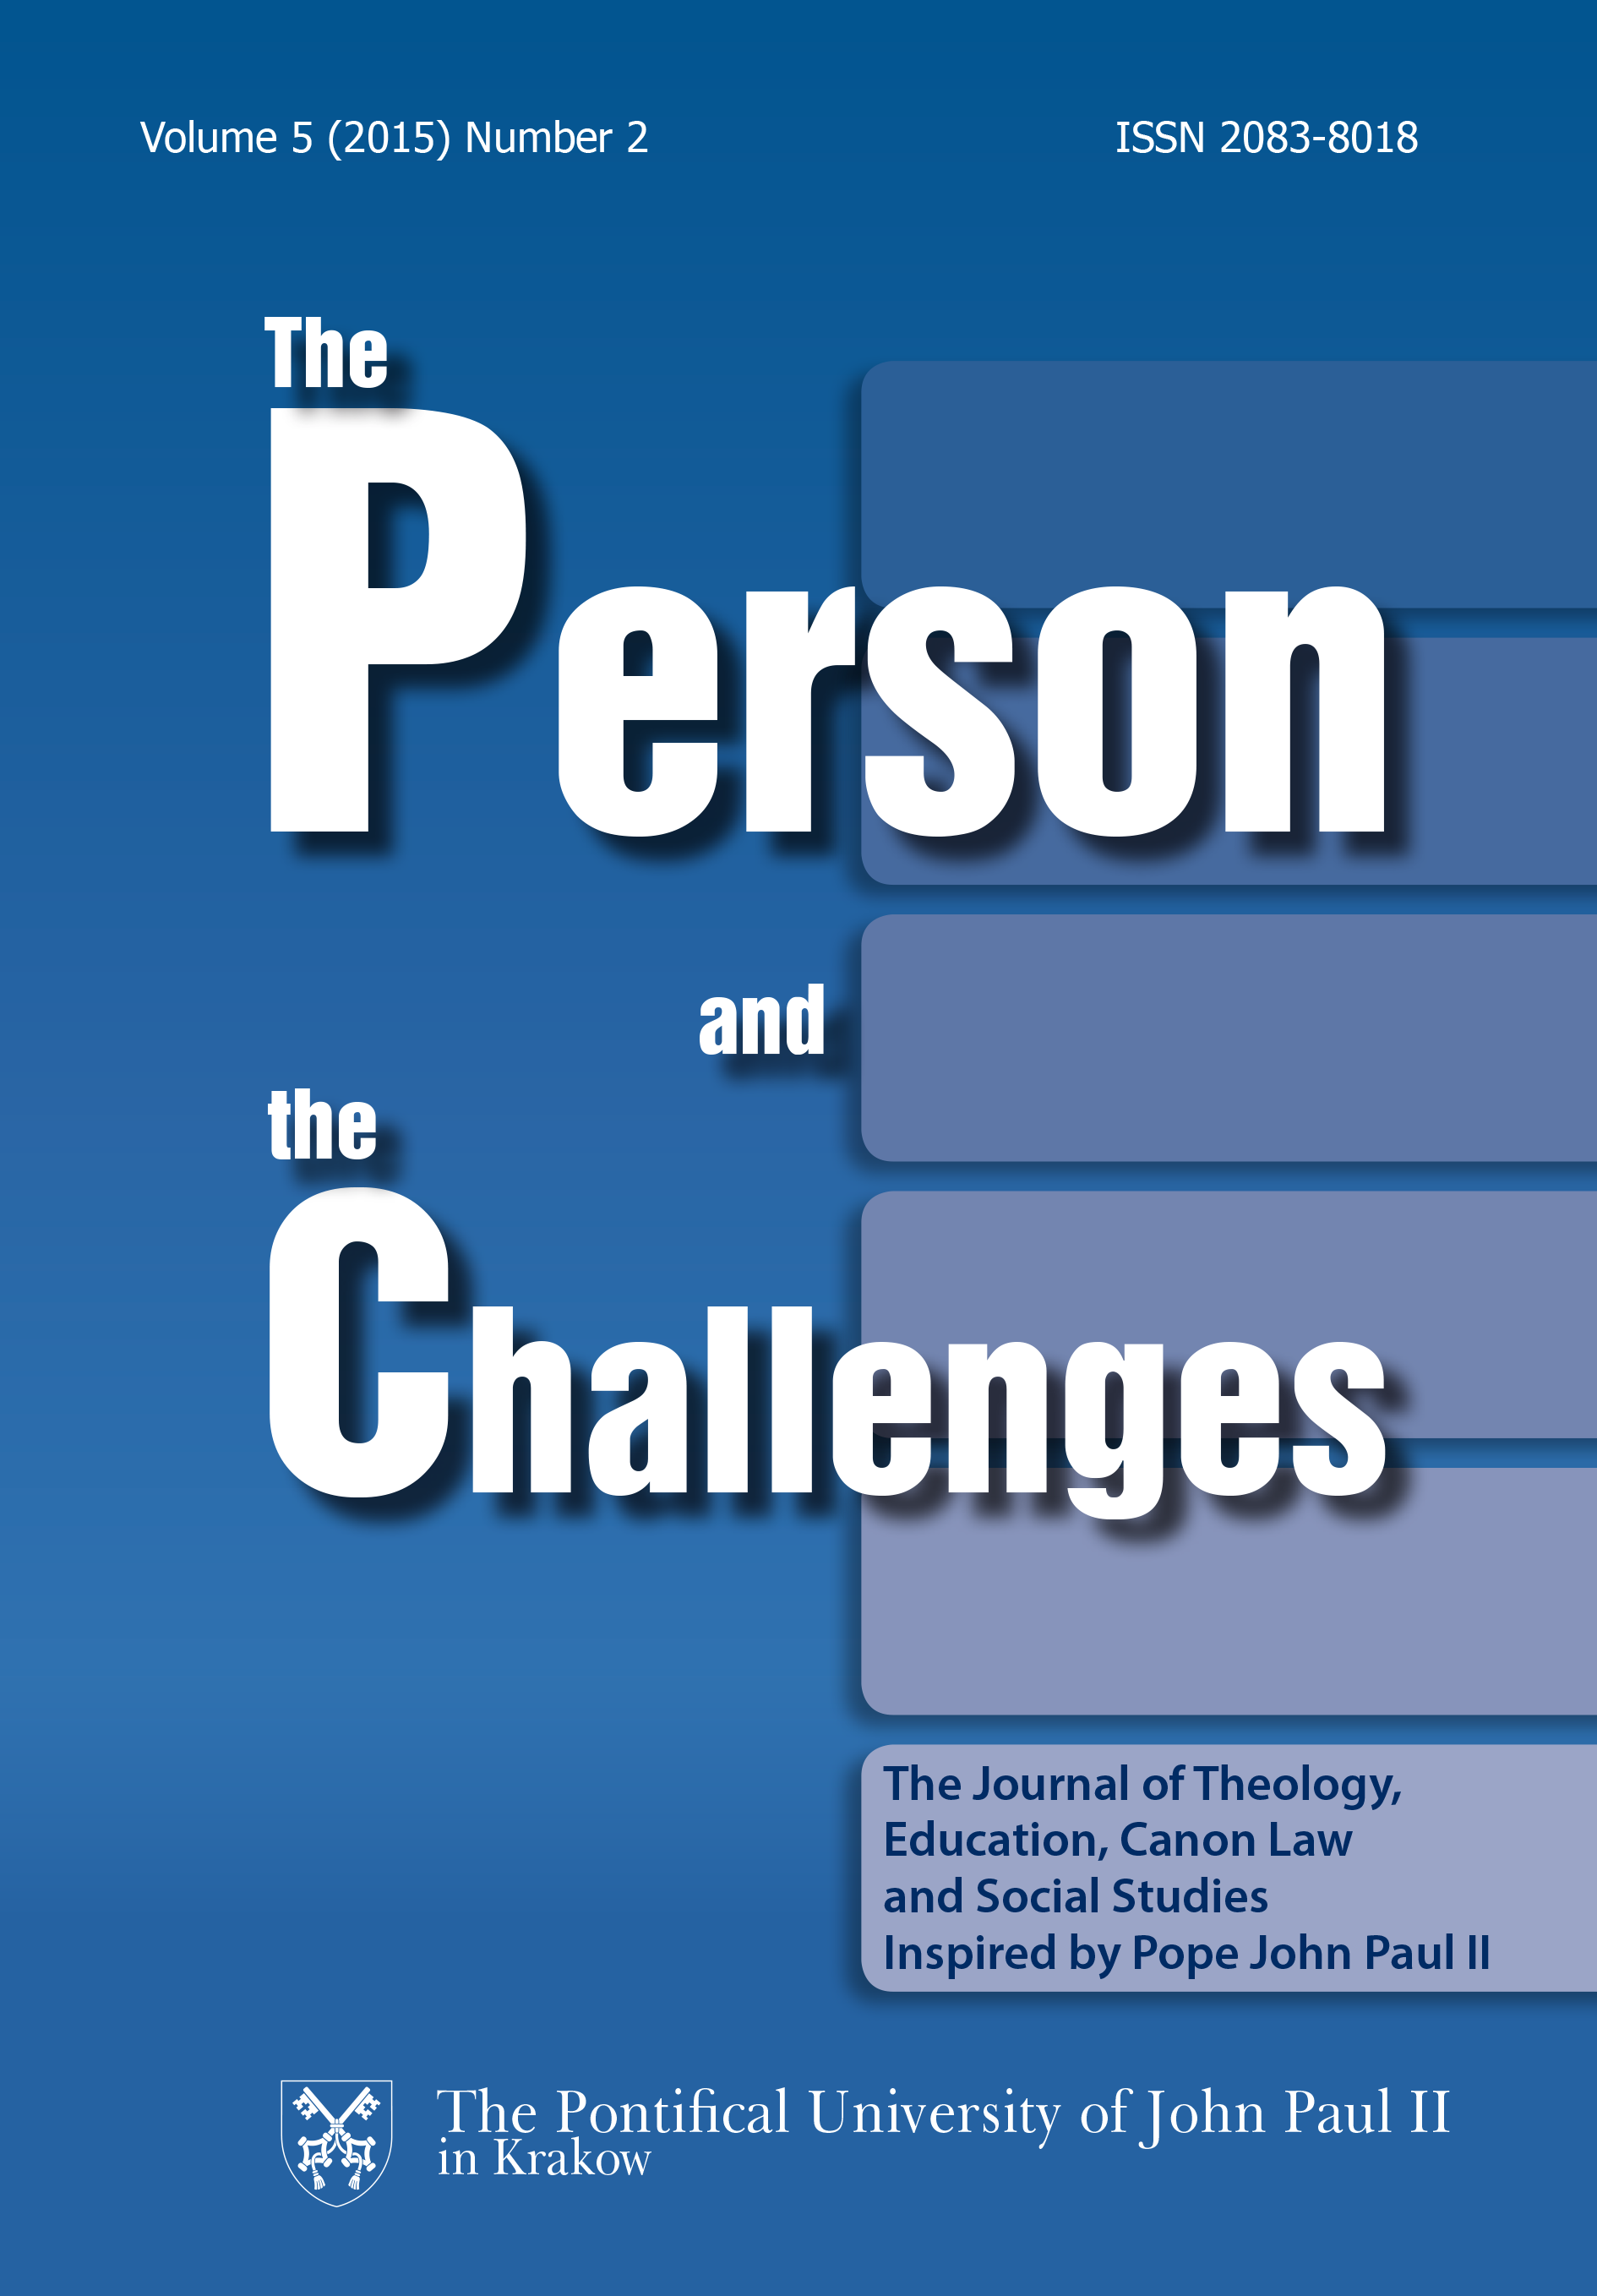 The Person and the Challenges. The Journal of Theology, Education, Canon Law and Social Studies Inspired by Pope John Paul II